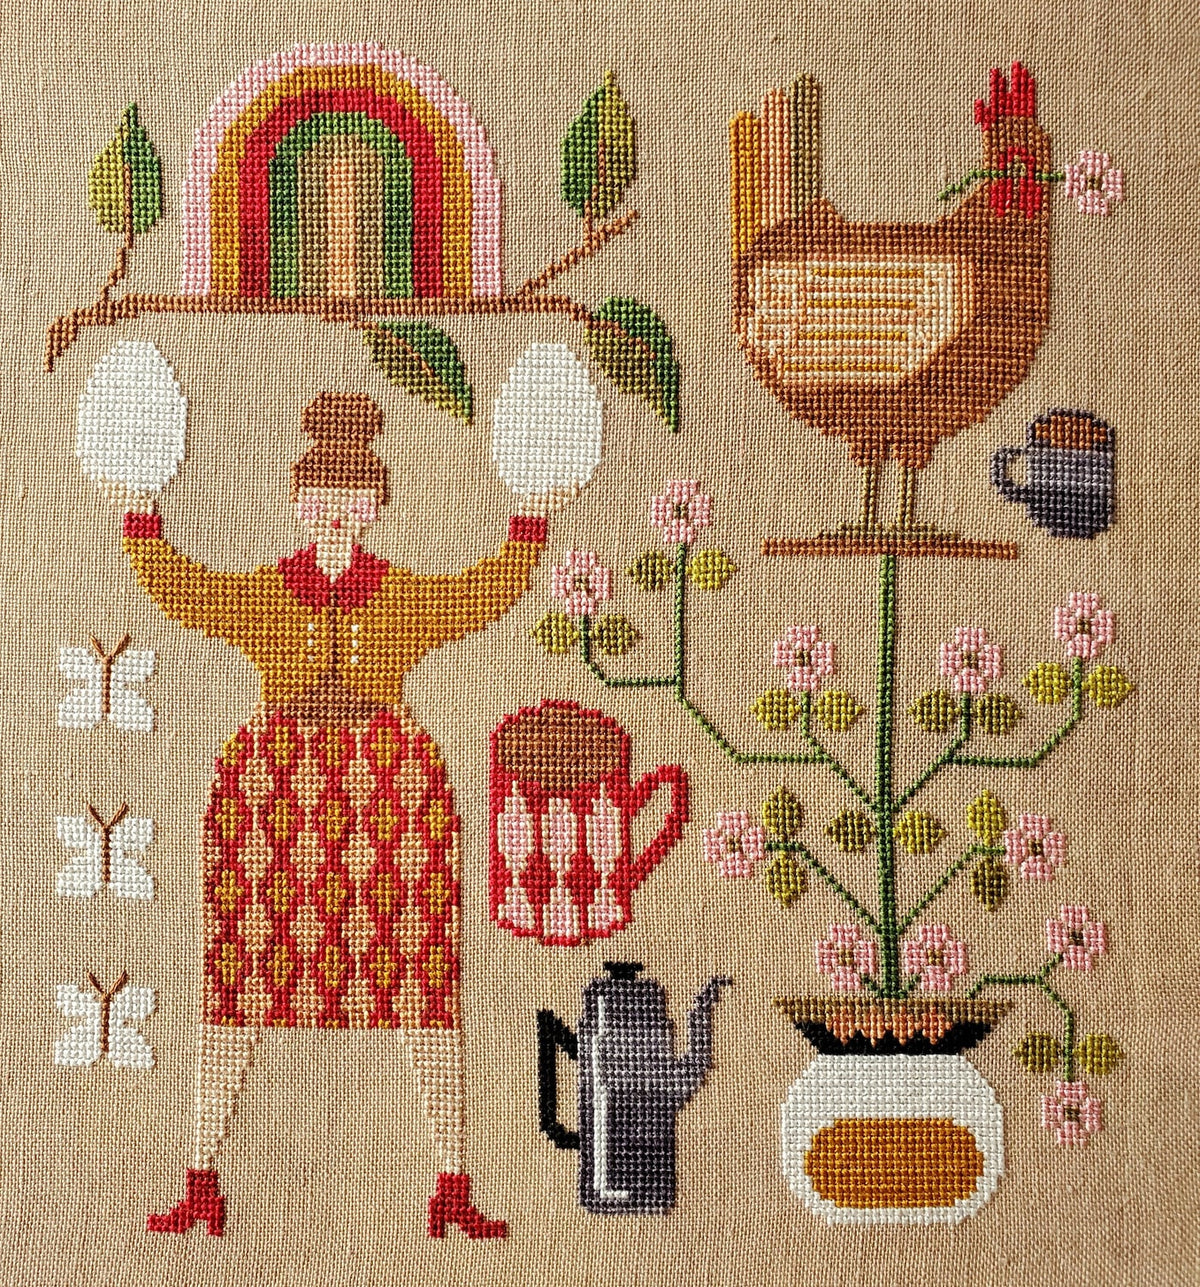 Coffee and Eggs Cross Stitch Pattern